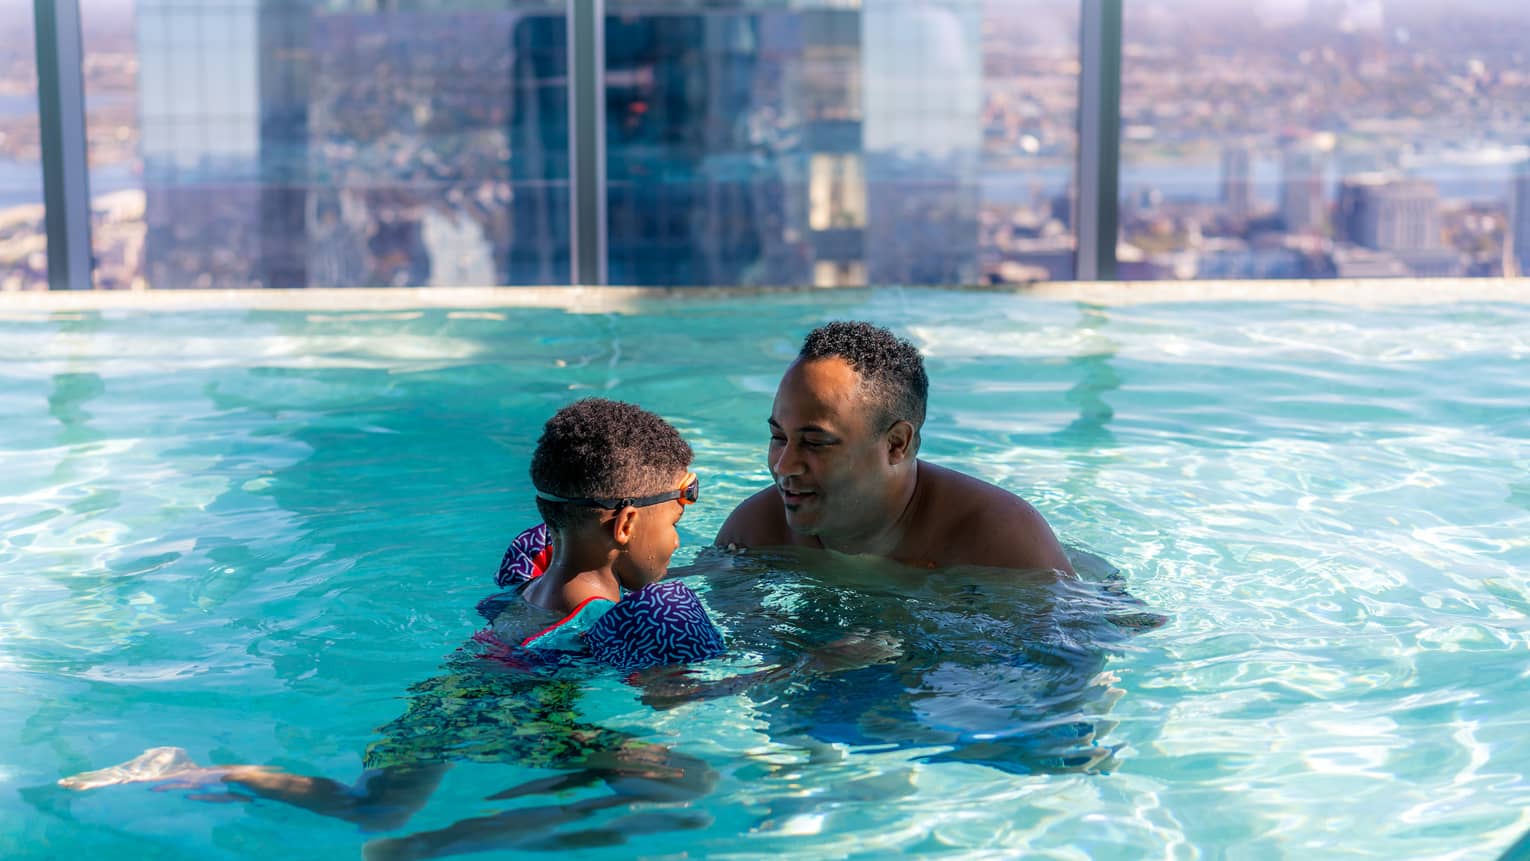 A father and son swimming in an indoor pool with large windows.